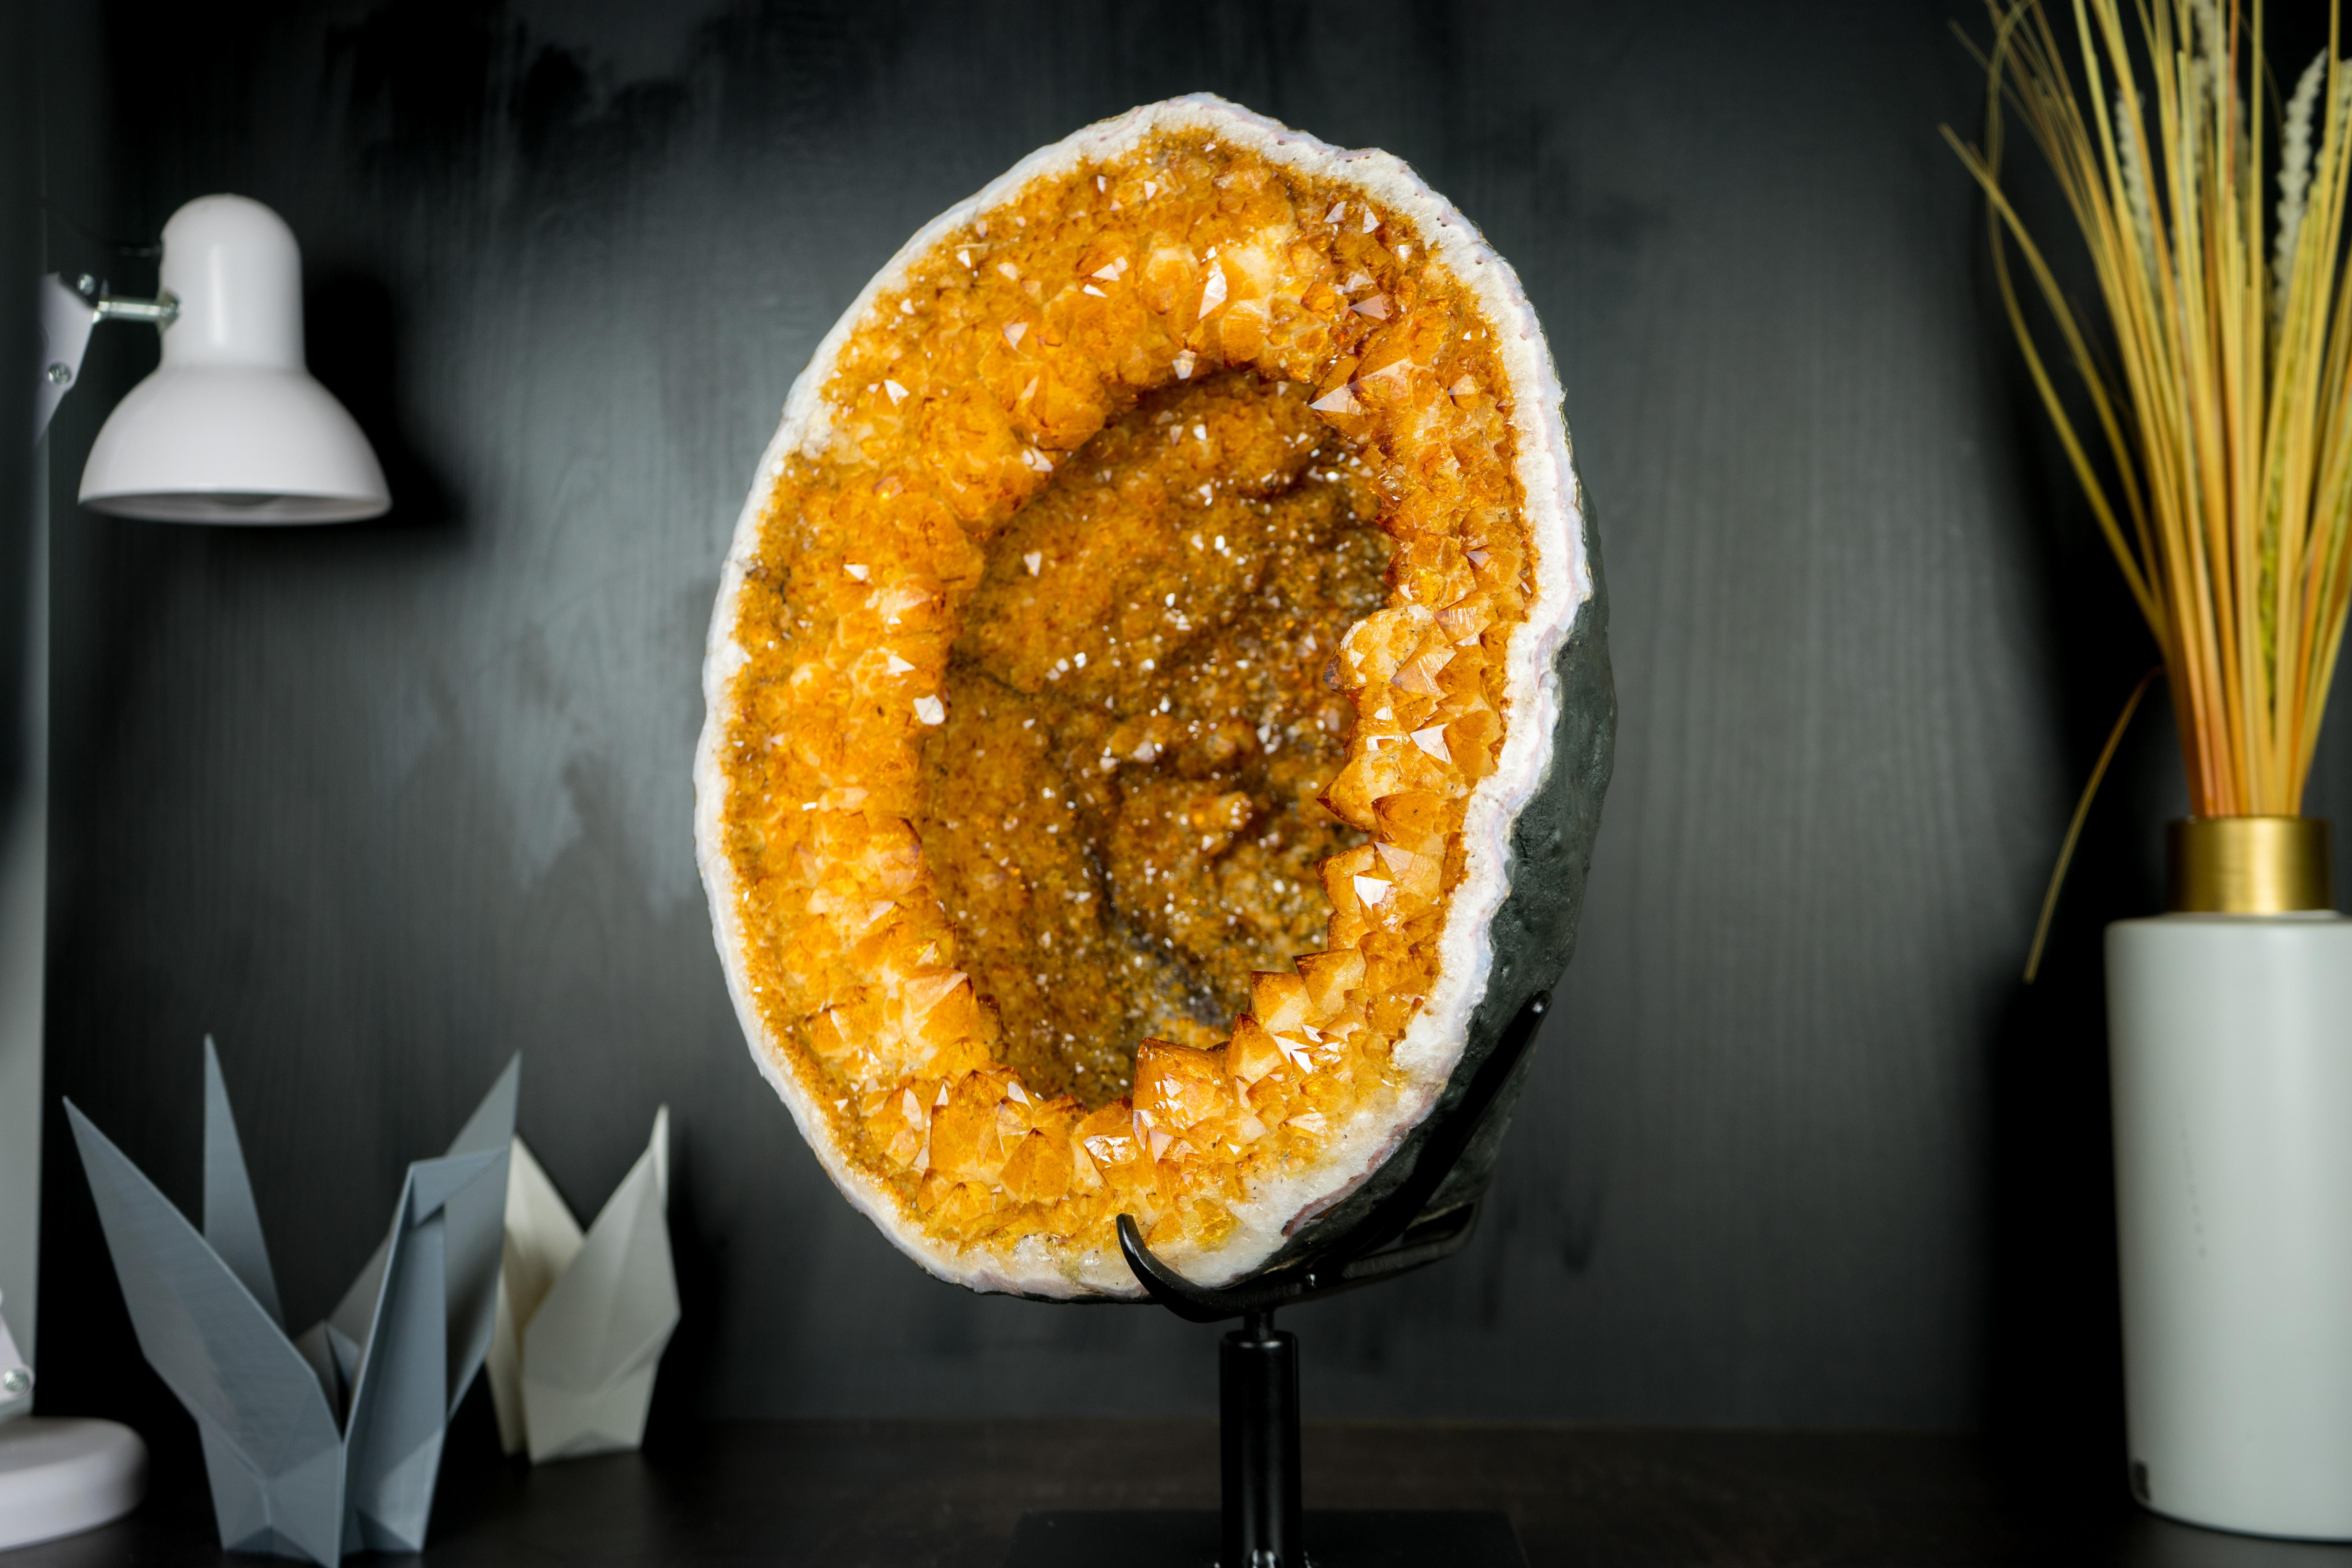 Contemporary Citrine Geode with Rare Citrine Crown and Stalactite Flowers - A Gallery Citrine For Sale